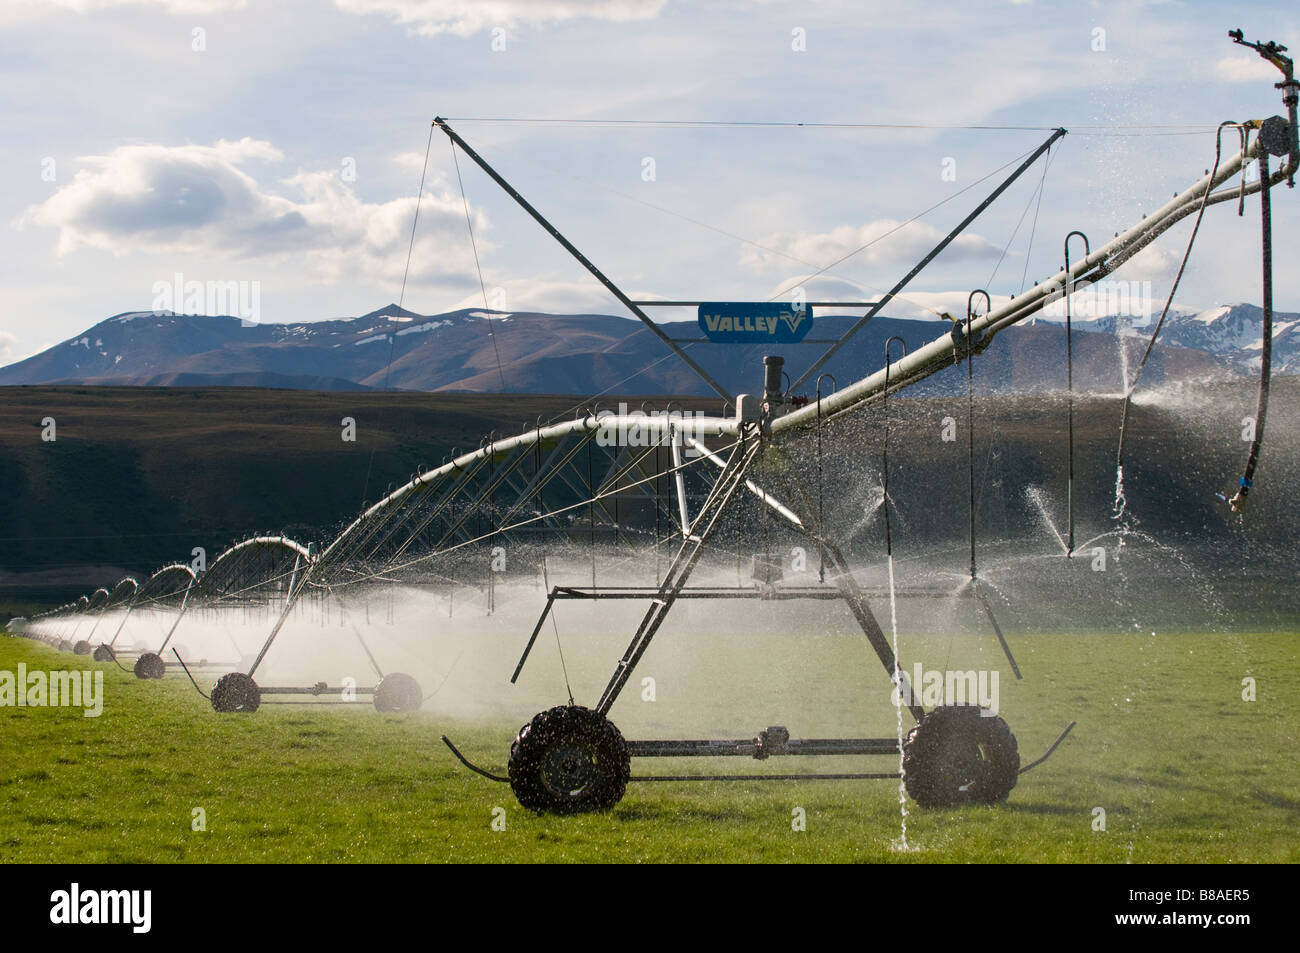 High country irrigation sprinkler Stock Photo